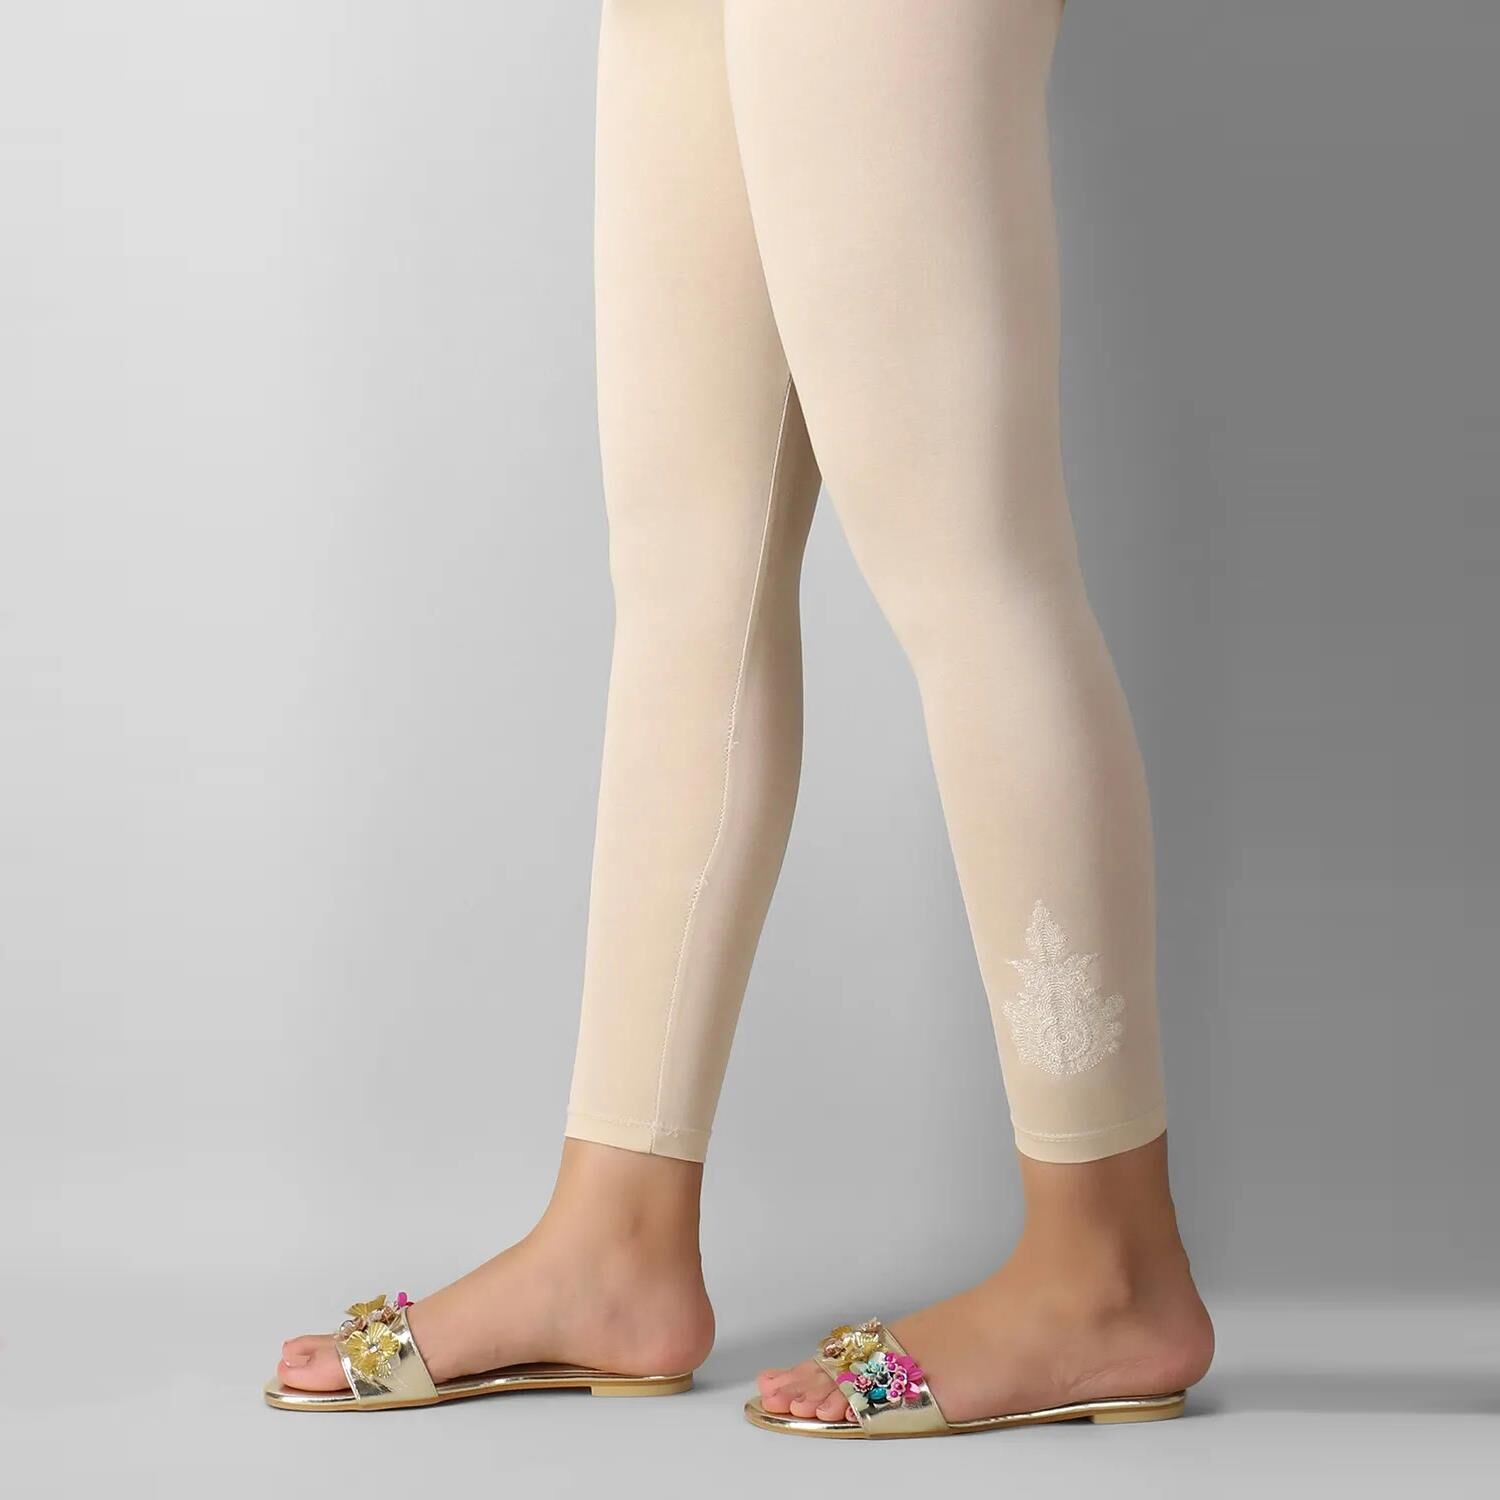 Khaadi, Womens, Embroidered Stretchable Tights, Color Beige, New